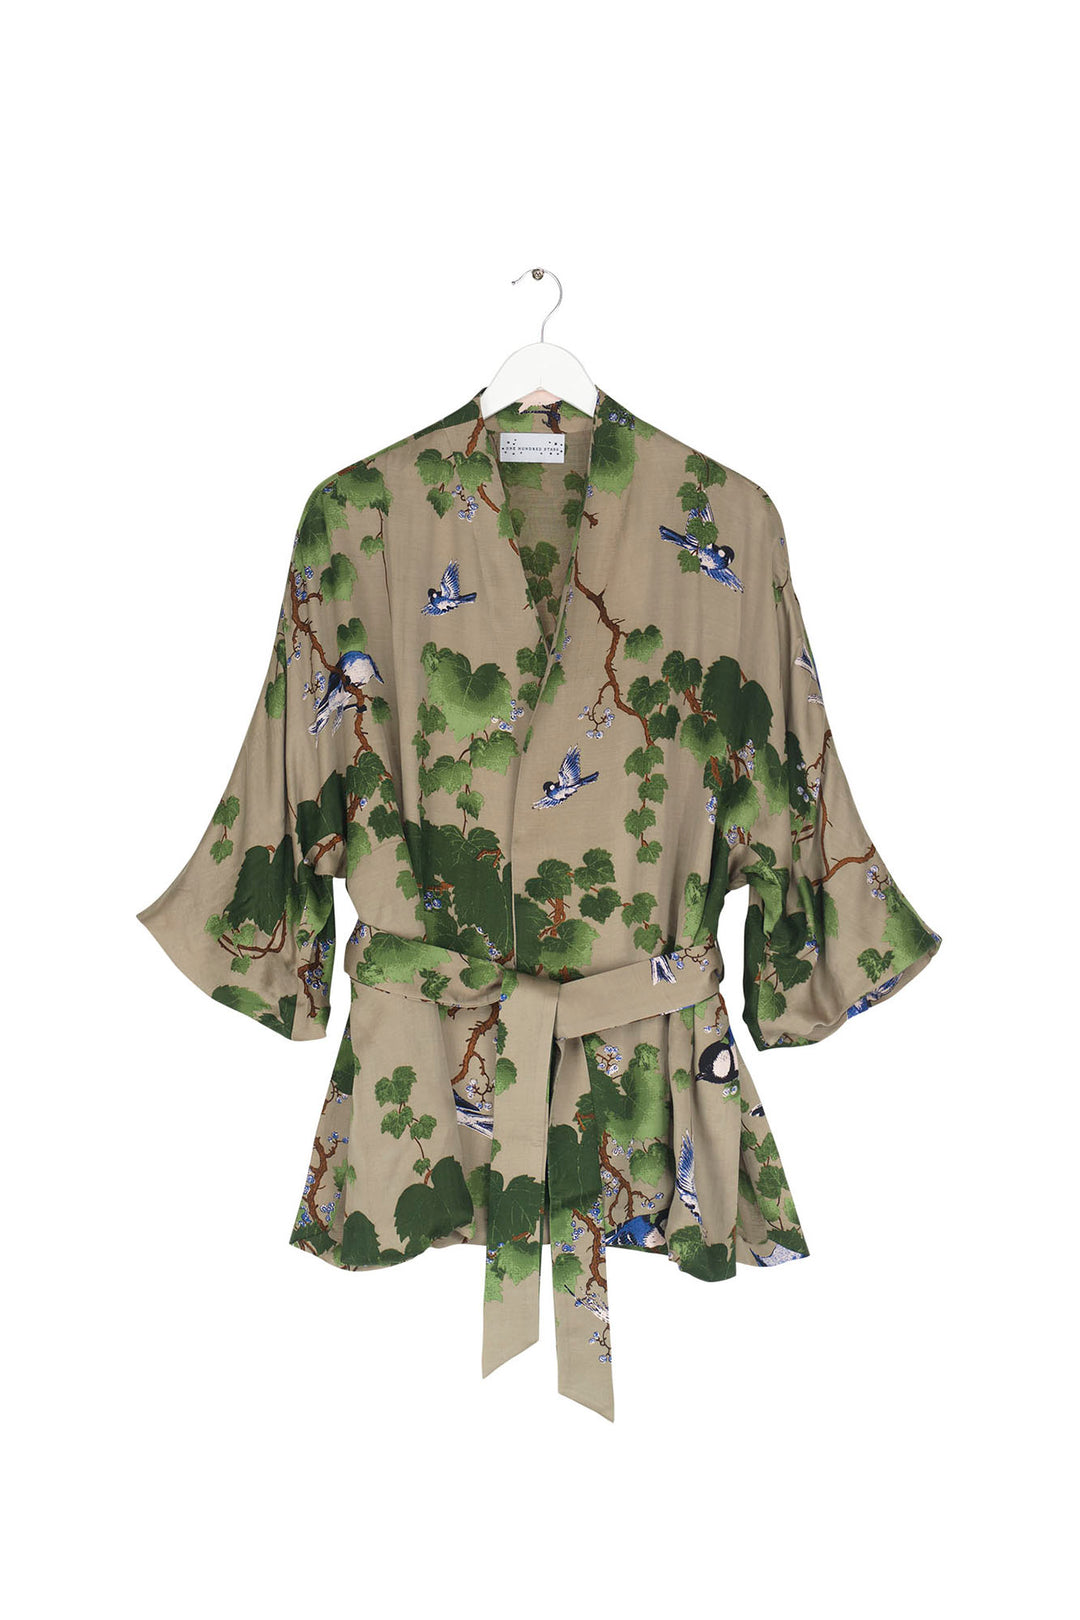 Satin ladies wrap jacket with green maple leaf pattern on a stone background by One Hundred Stars